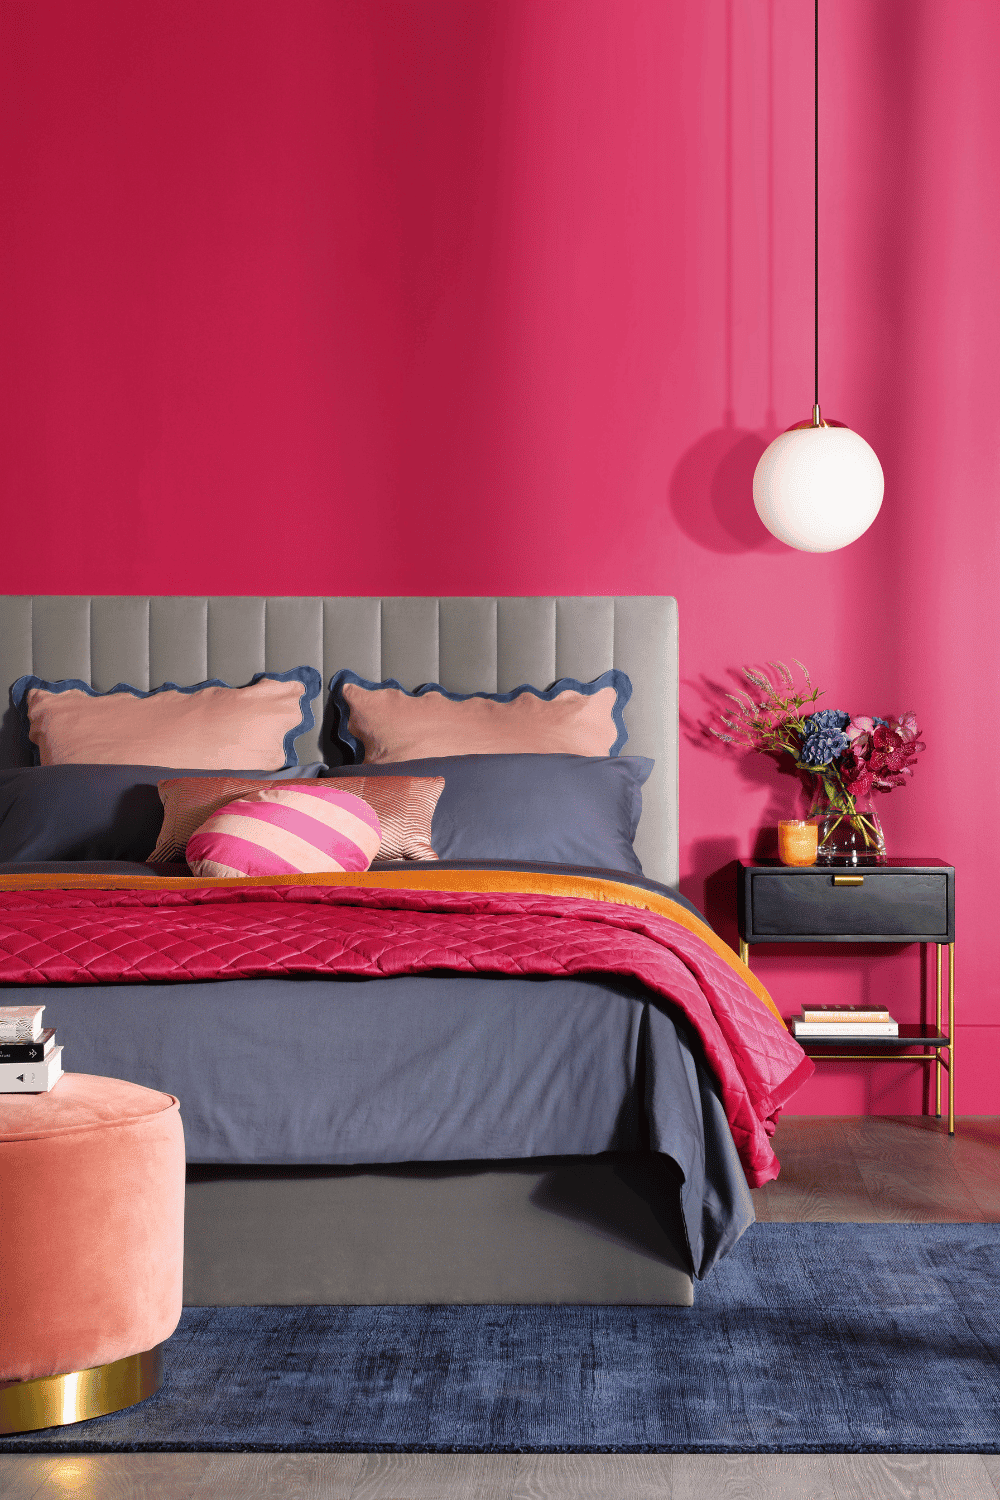 19 Pink and Grey Bedroom Ideas For Adults - Sleek-chic Interiors